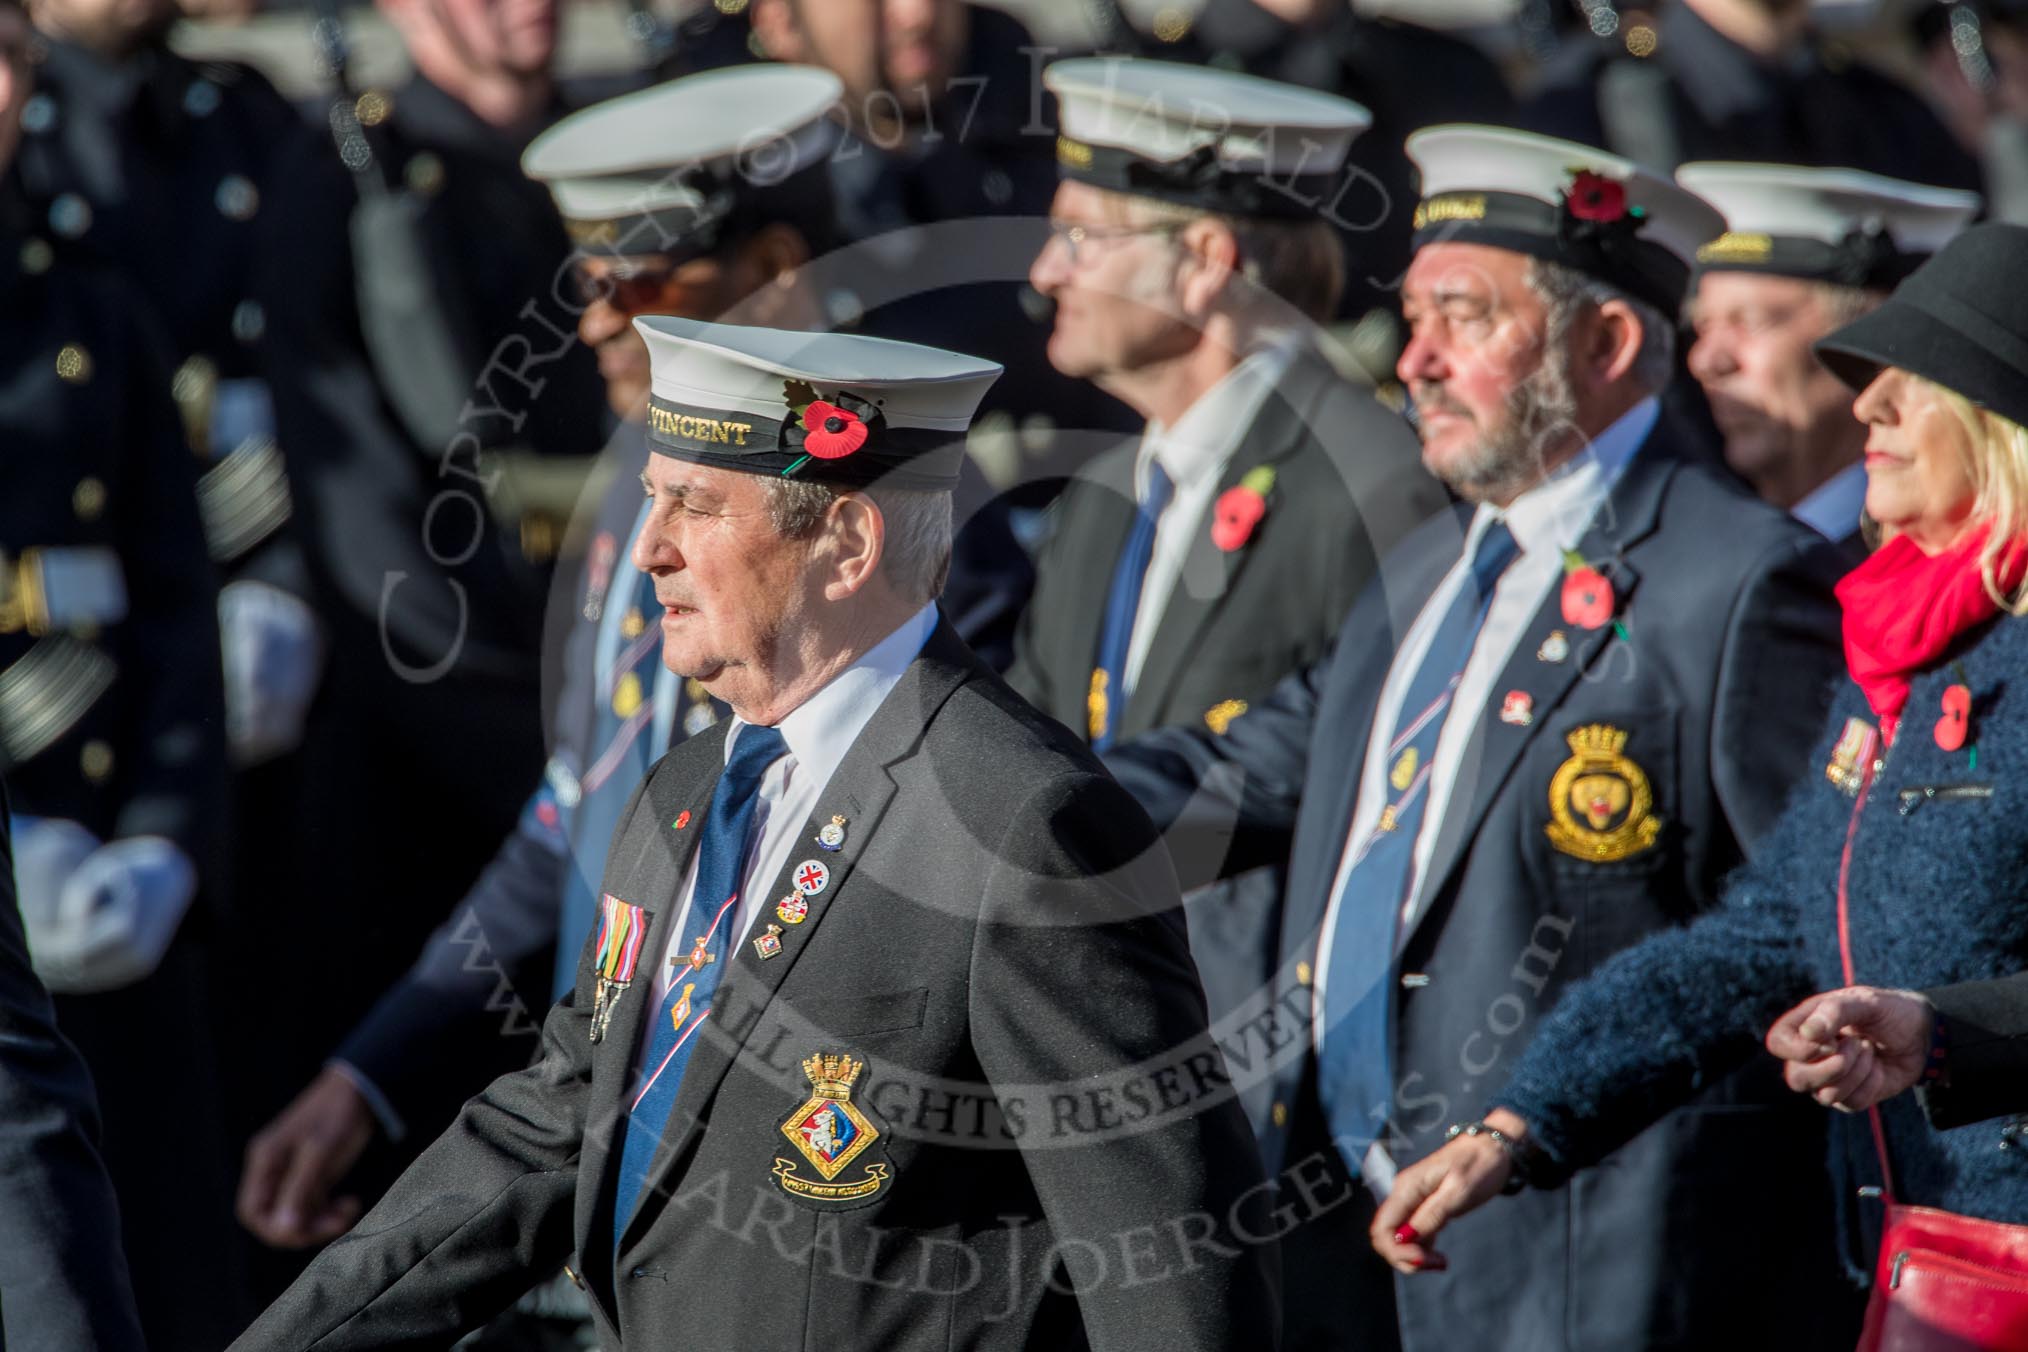 HMS Tiger Association (Group E25, 11 members) during the Royal British Legion March Past on Remembrance Sunday at the Cenotaph, Whitehall, Westminster, London, 11 November 2018, 11:44.